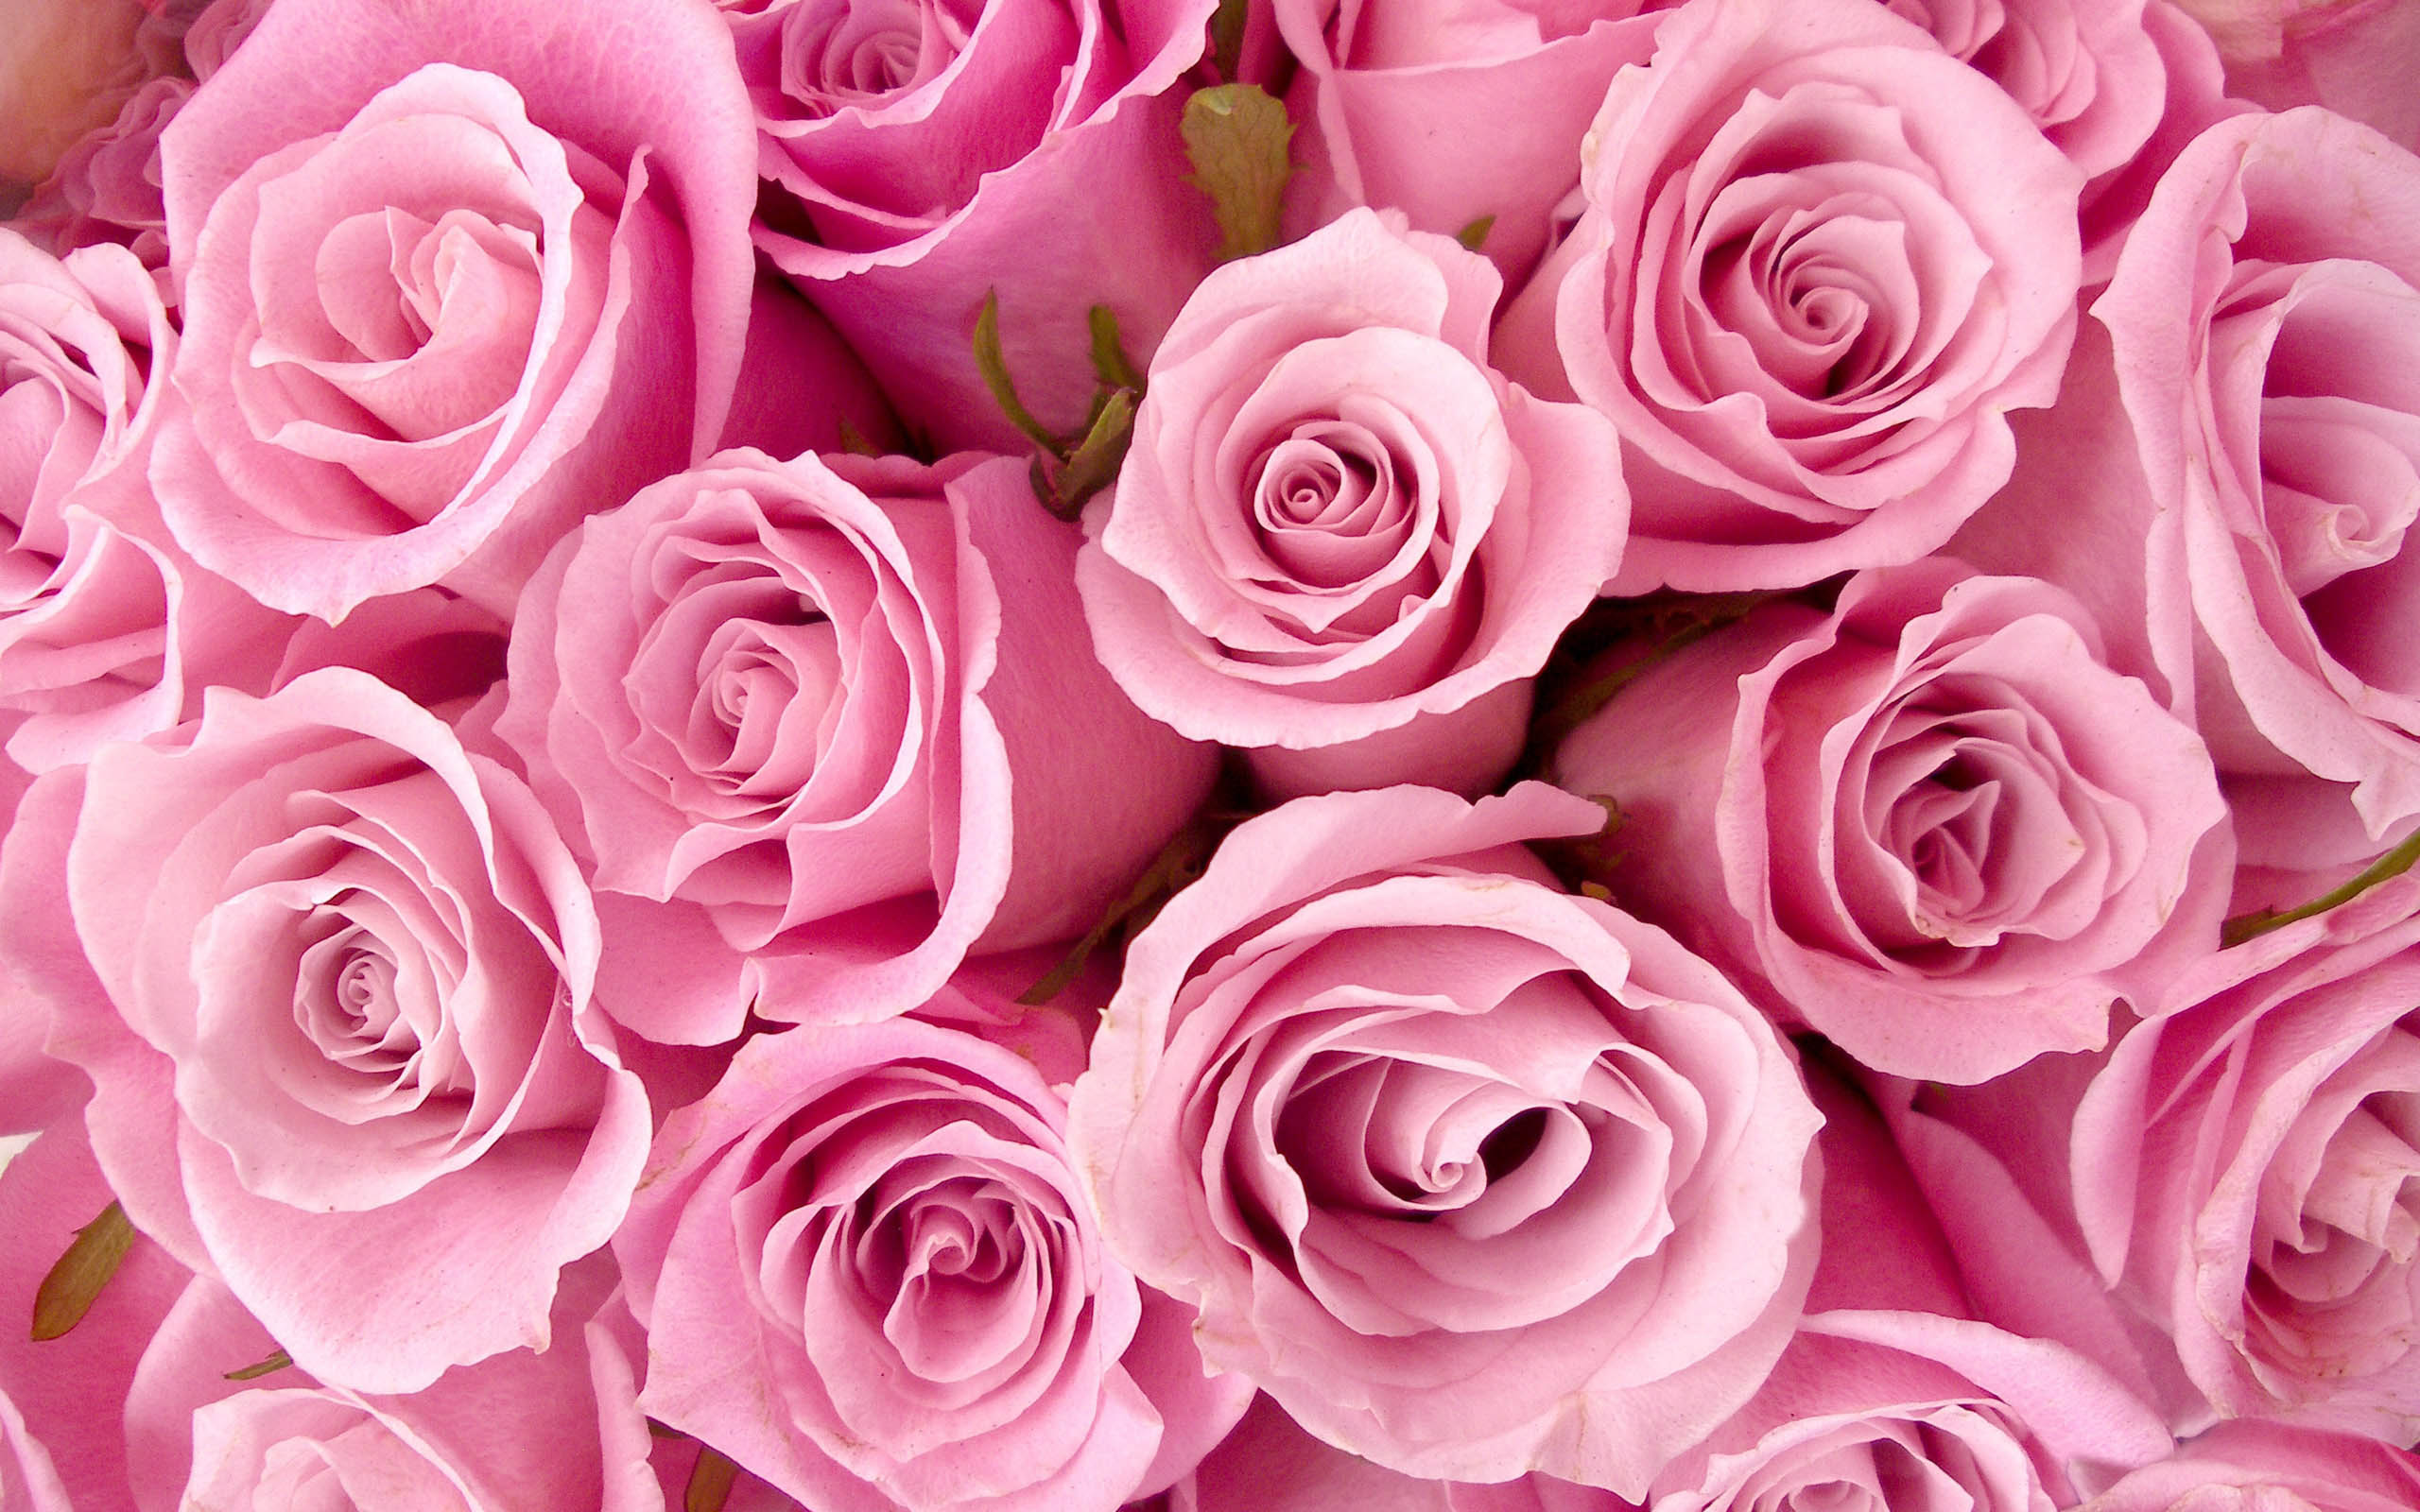 HD Pink Roses Wallpaper 23380 2560x1600 px